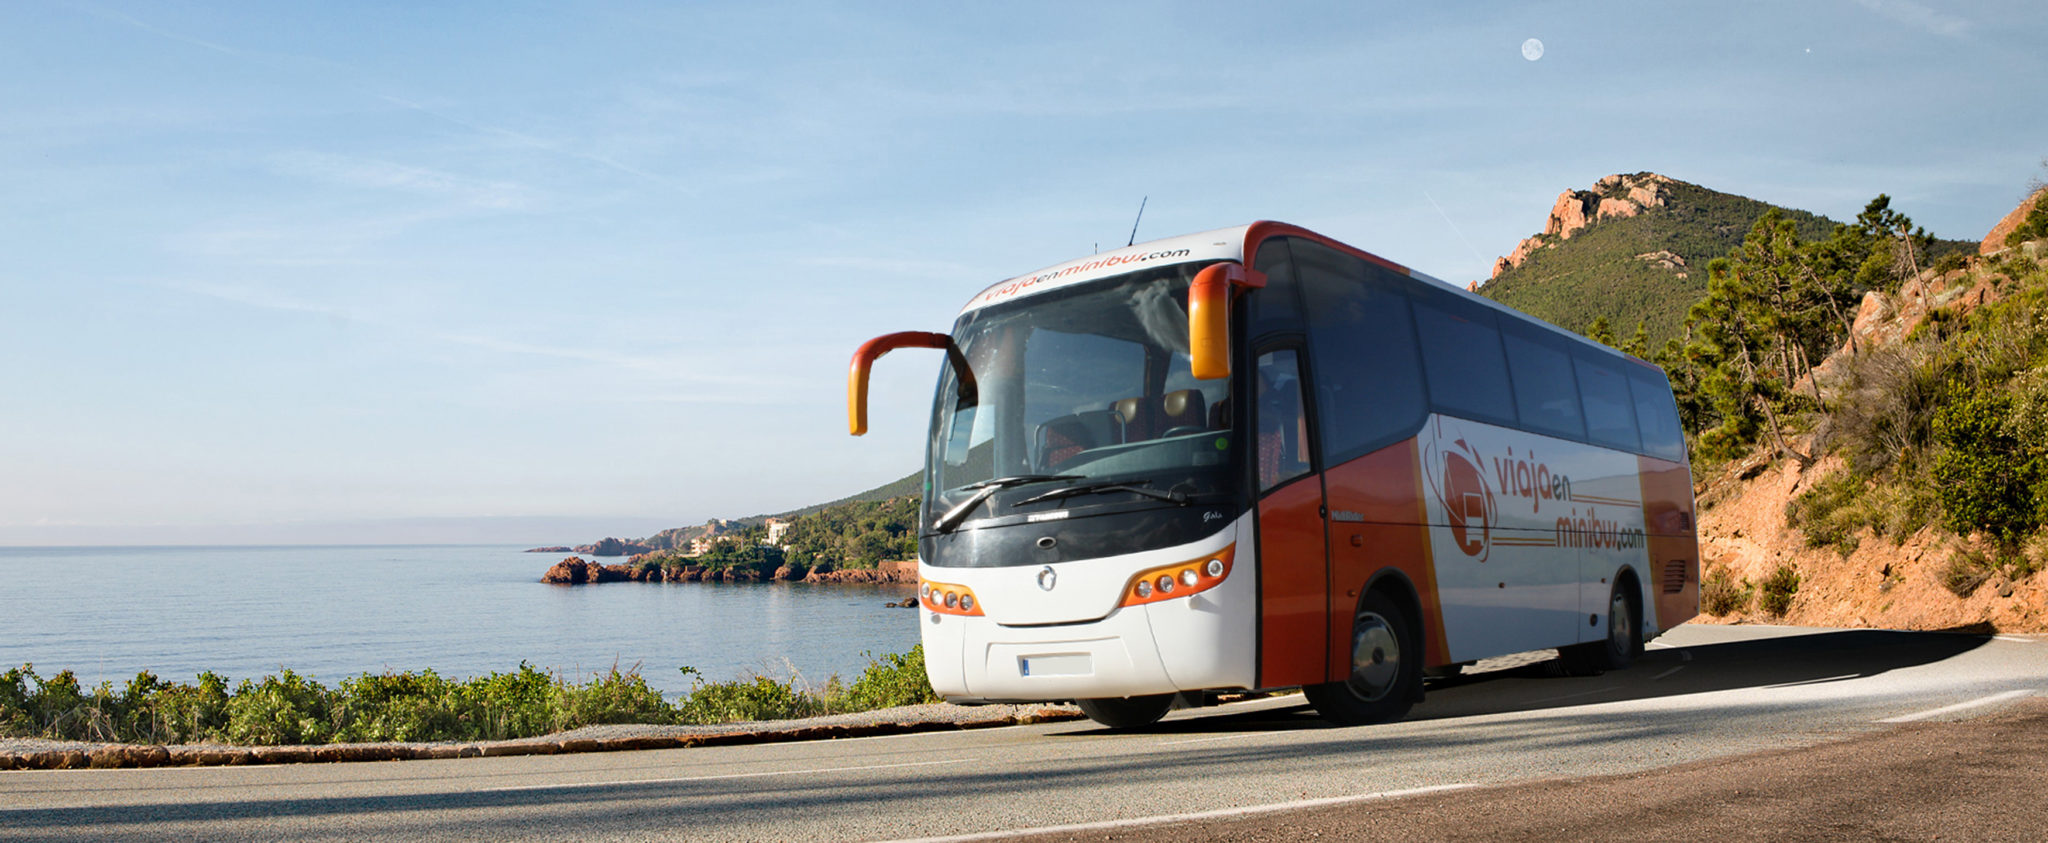 Alquiler microbuses